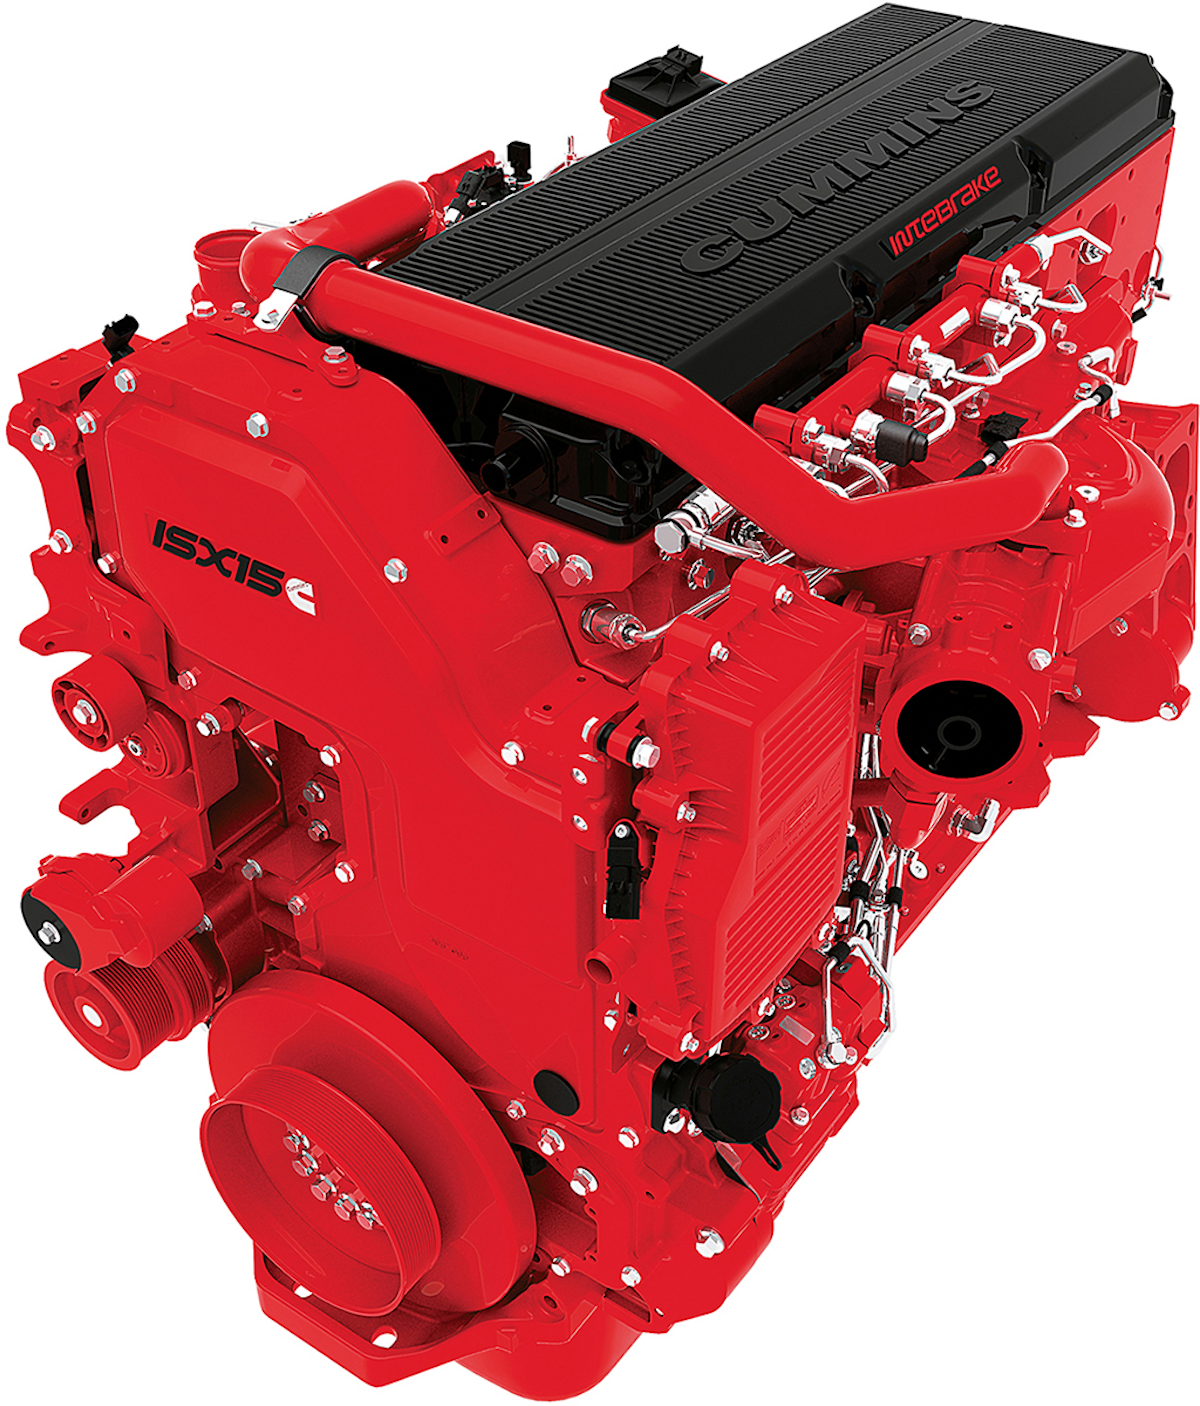 Cummins Introduces New Horsepower Ratings of ISX15 Engines with 1,850